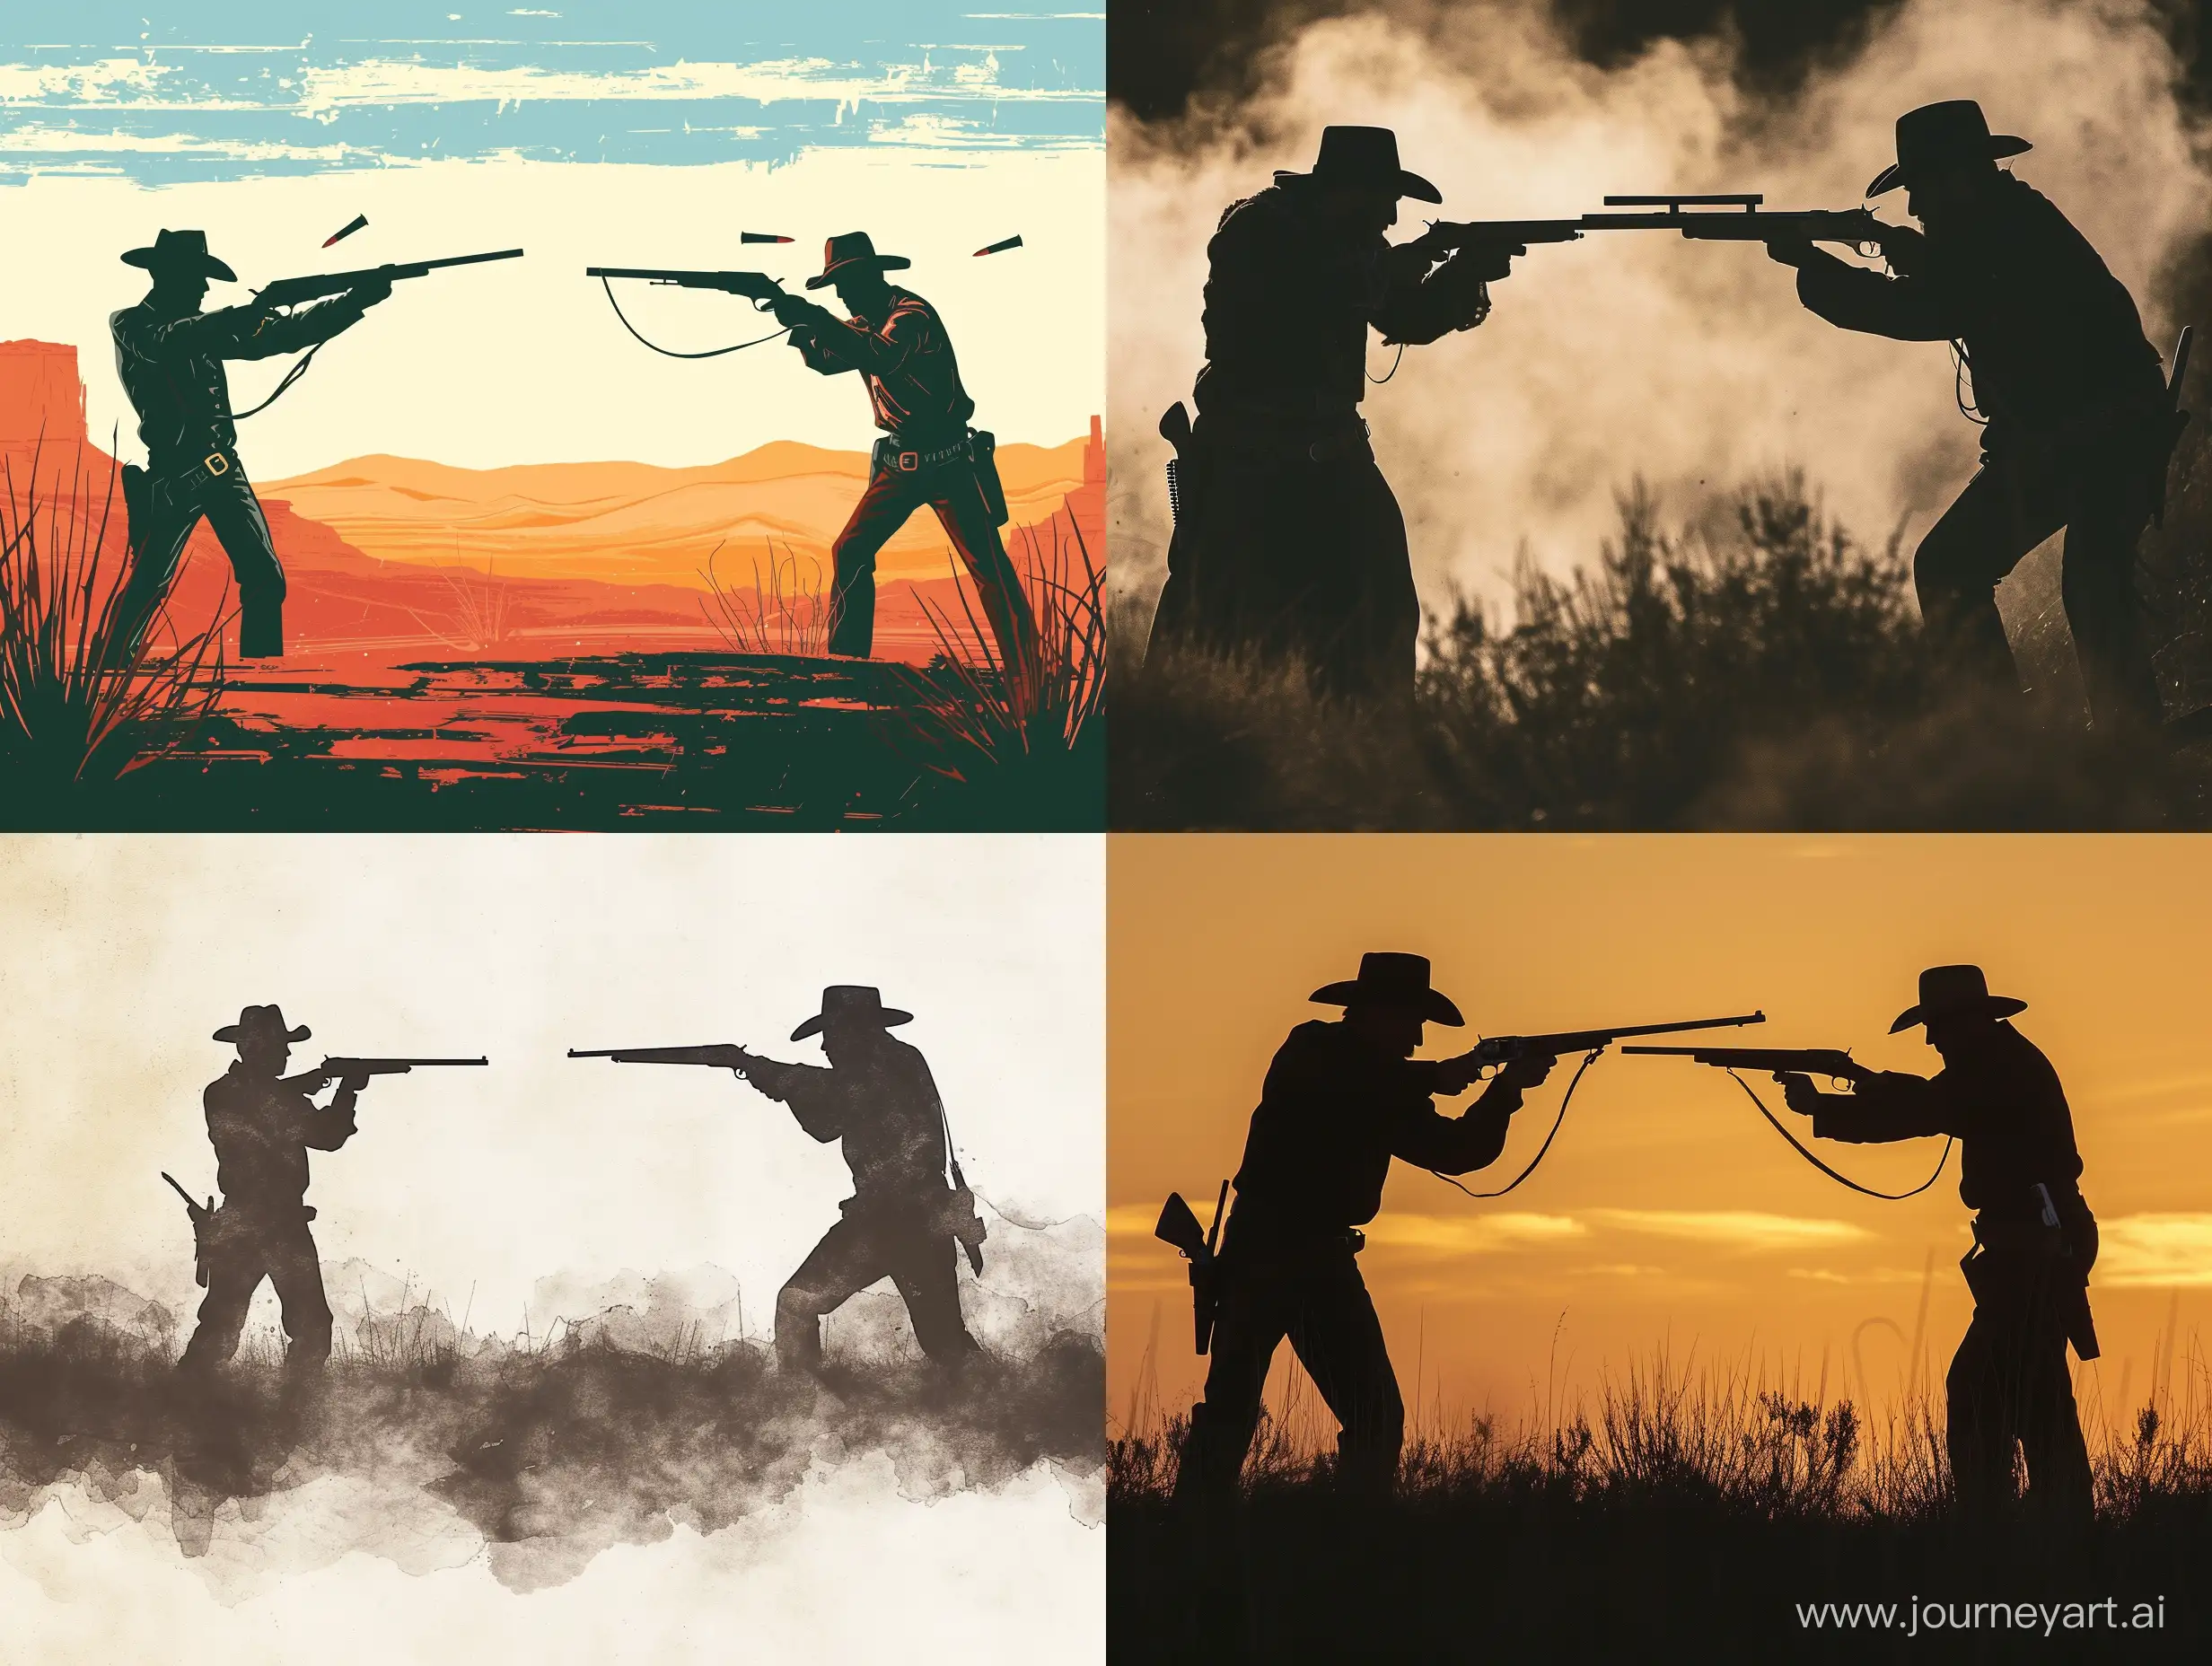 Wild-West-Duel-Two-Cowboys-Face-Off-in-Rifles-Showdown